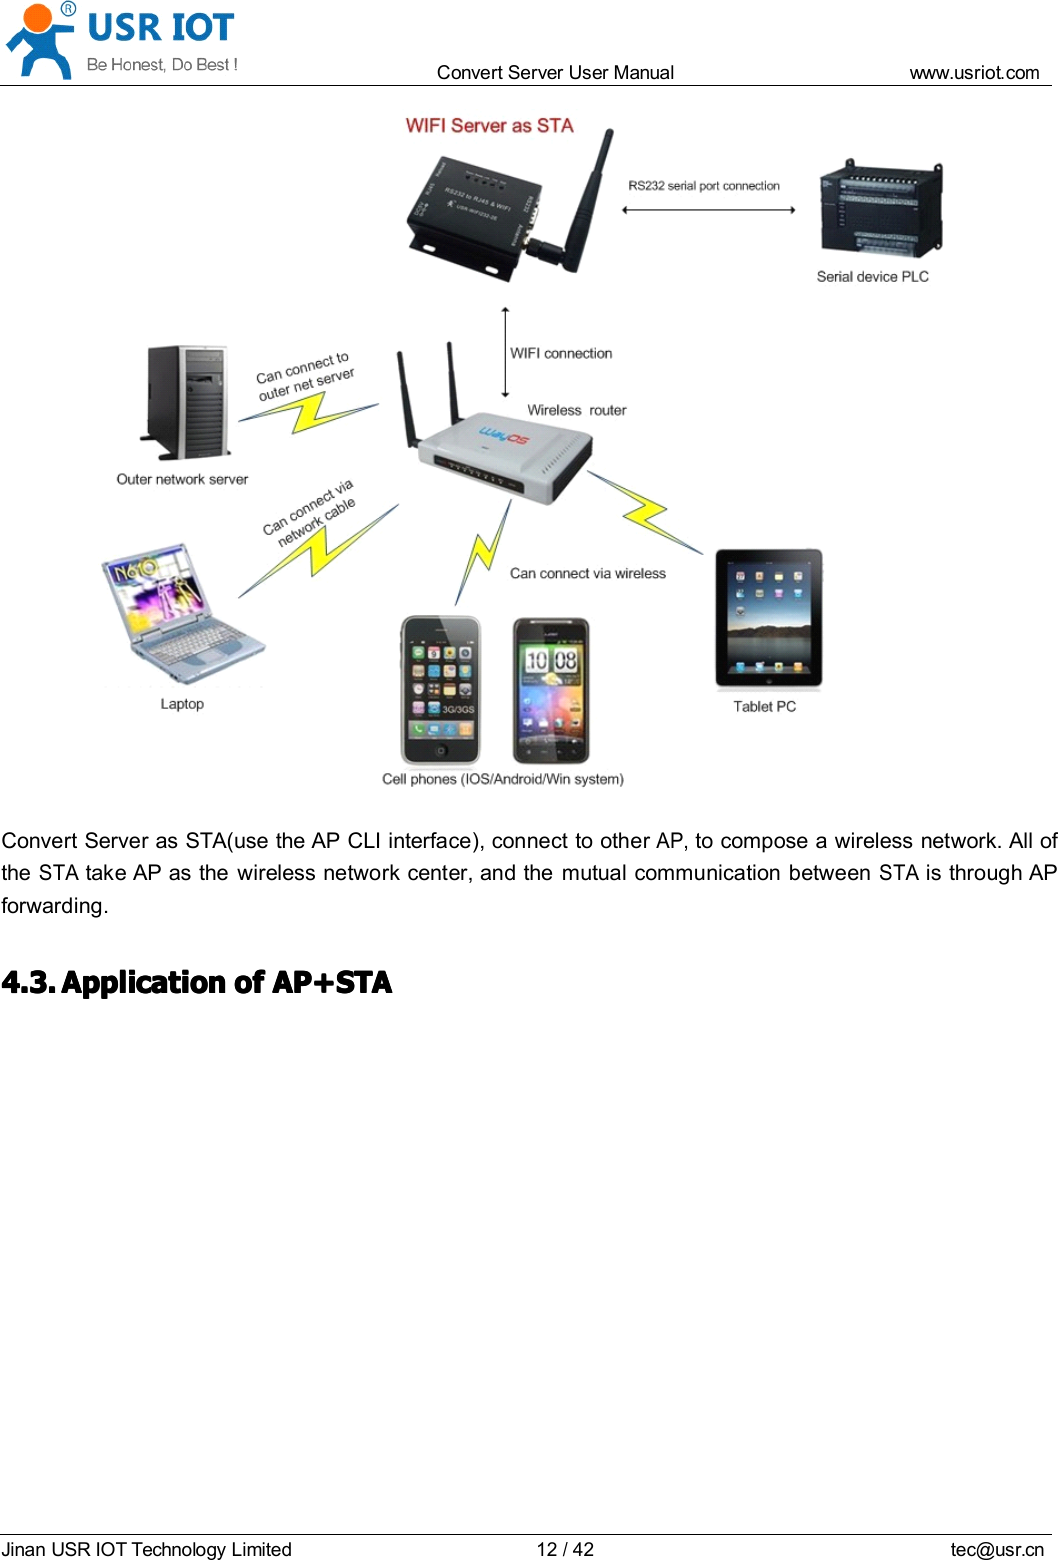 Convert Server User Manual www.usr iot.c omJinan USR IOT Technology Limited 12/42 tec@usr.cnConvert Server as STA(use the AP CLI interface), connect to otherAP,to compose a wireless network. All oftheSTAtake AP as the wireless network center, and the mutual communication betweenSTAis through APforwarding.4.3.4.3.4.3.4.3. ApplicationApplicationApplicationApplication ofofofof AP+STAAP+STAAP+STAAP+STA